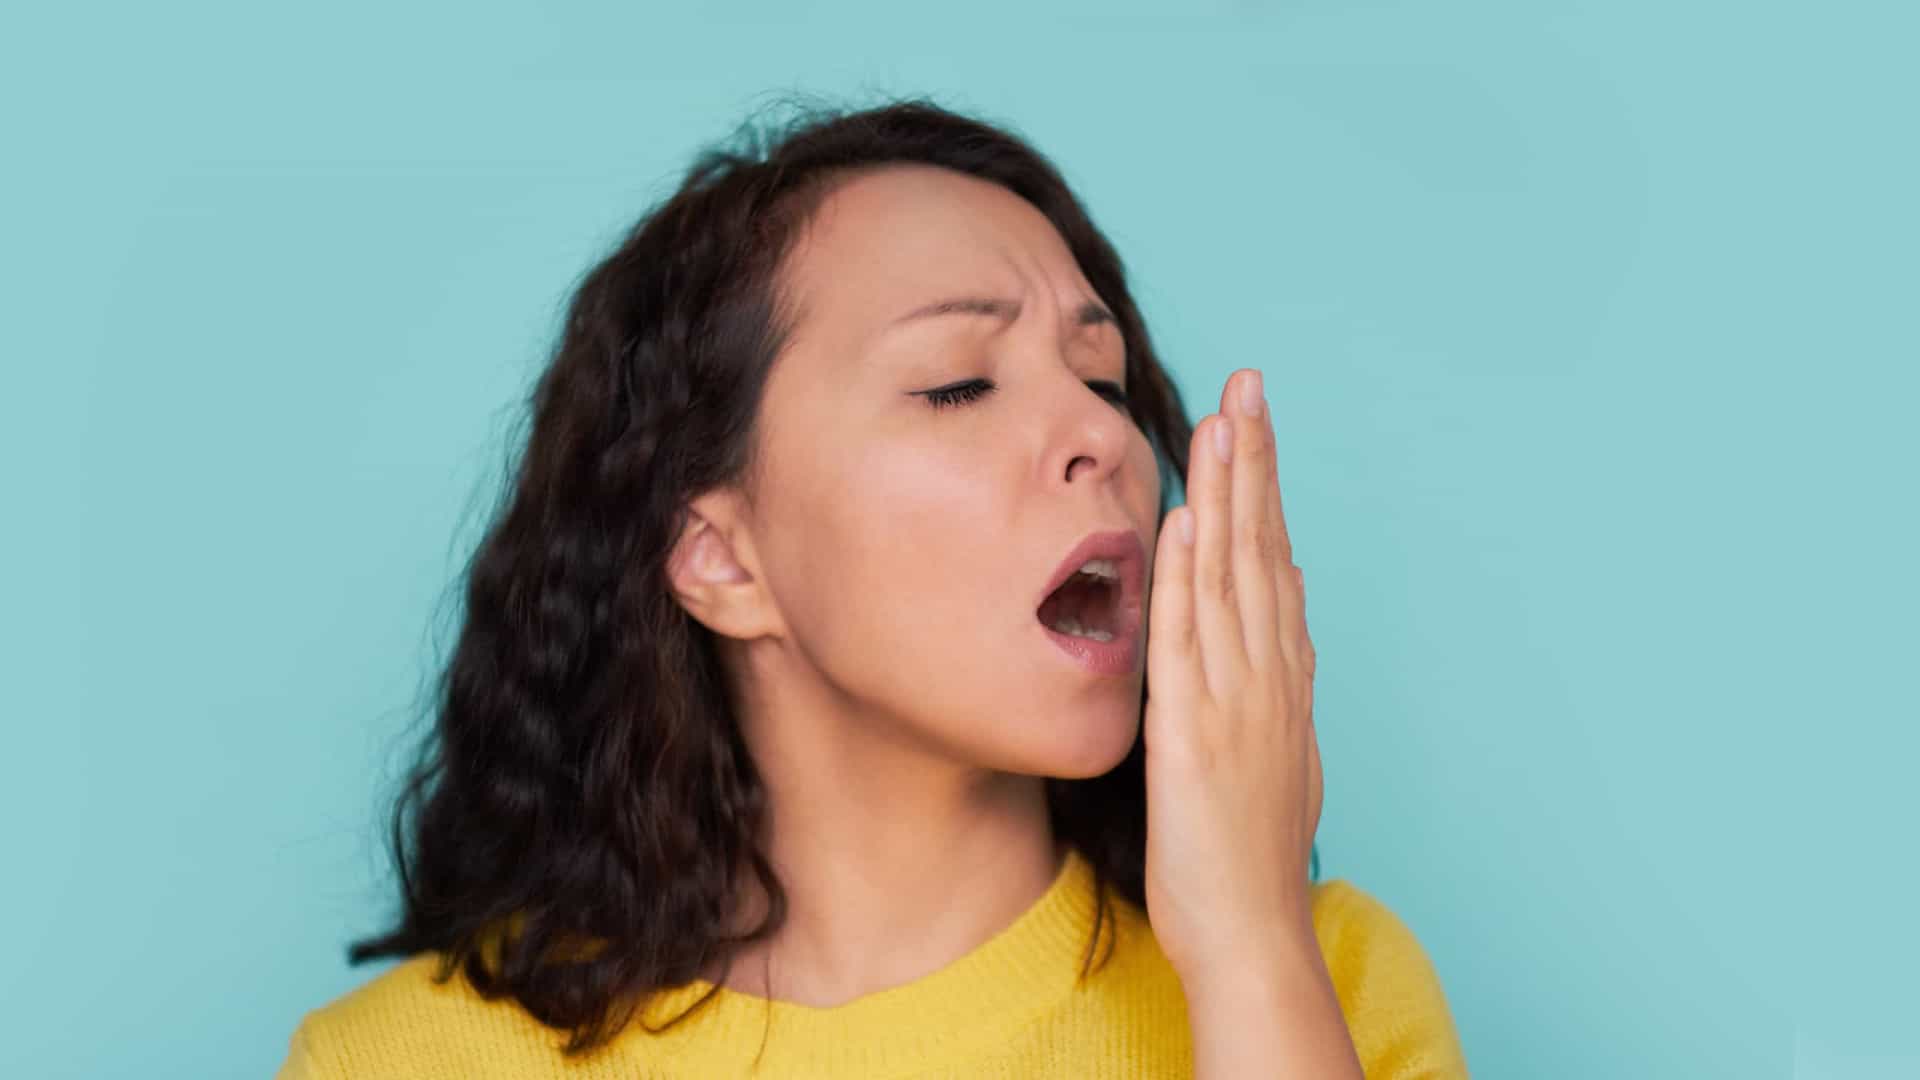 <p>This goes for any foods that can cause bad breath, but garlic in particular is a nasty one. So, avoid garlic breath. Your dentist will appreciate it!</p><p><a href="https://www.msn.com/en-us/community/channel/vid-7xx8mnucu55yw63we9va2gwr7uihbxwc68fxqp25x6tg4ftibpra?cvid=94631541bc0f4f89bfd59158d696ad7e">Follow us and access great exclusive content everyday</a></p>